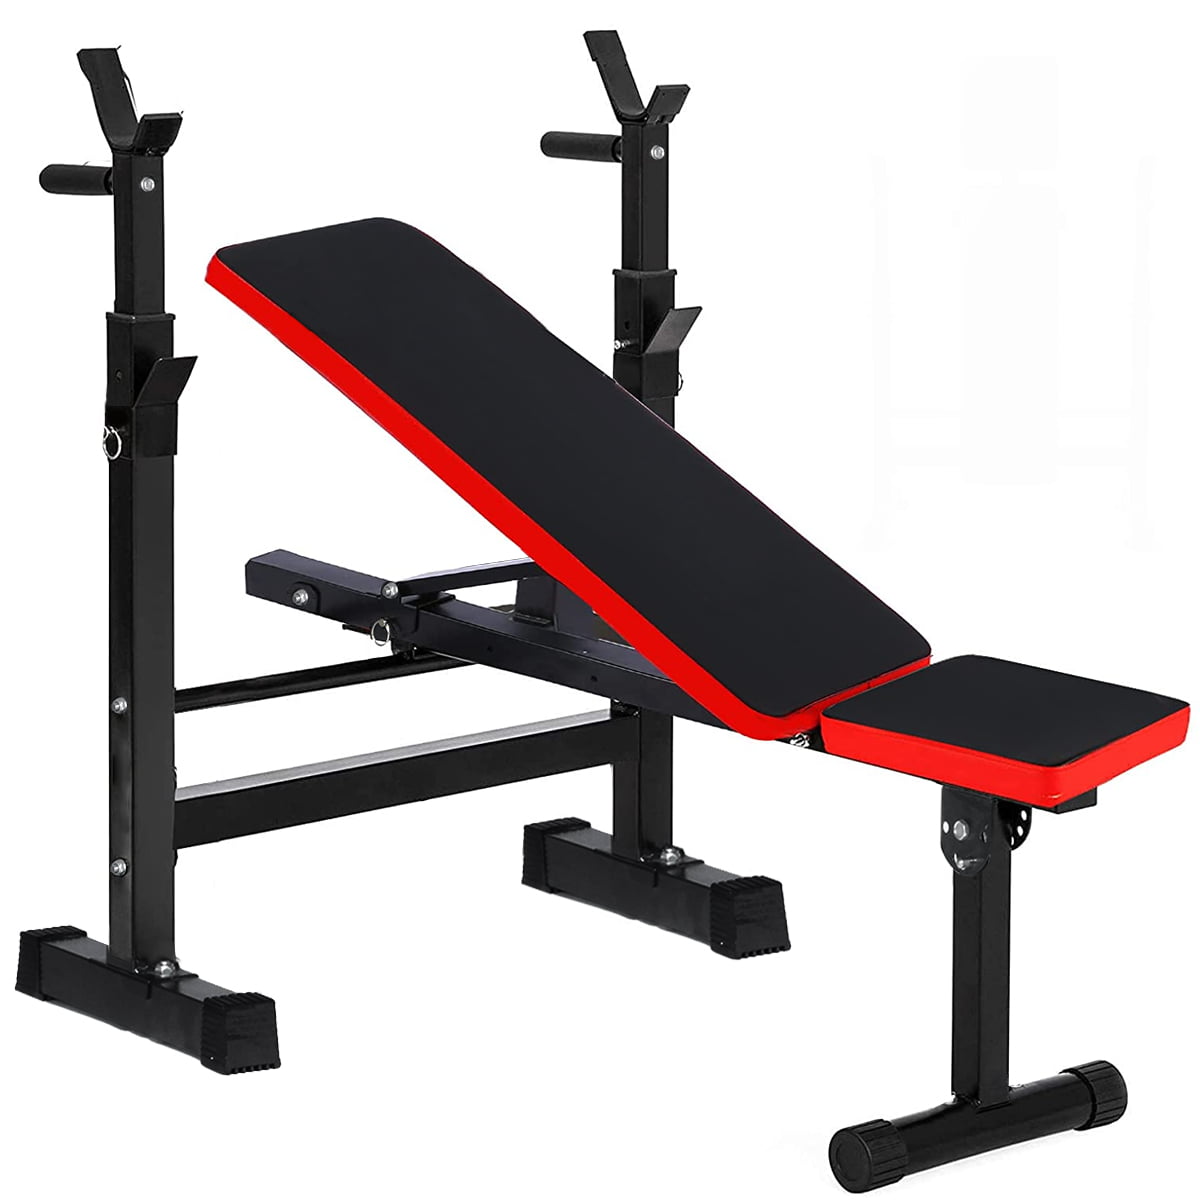 Weight Bench Press Set Fitness Gym Exercise Equipment Lifting Strength Home+4in1 